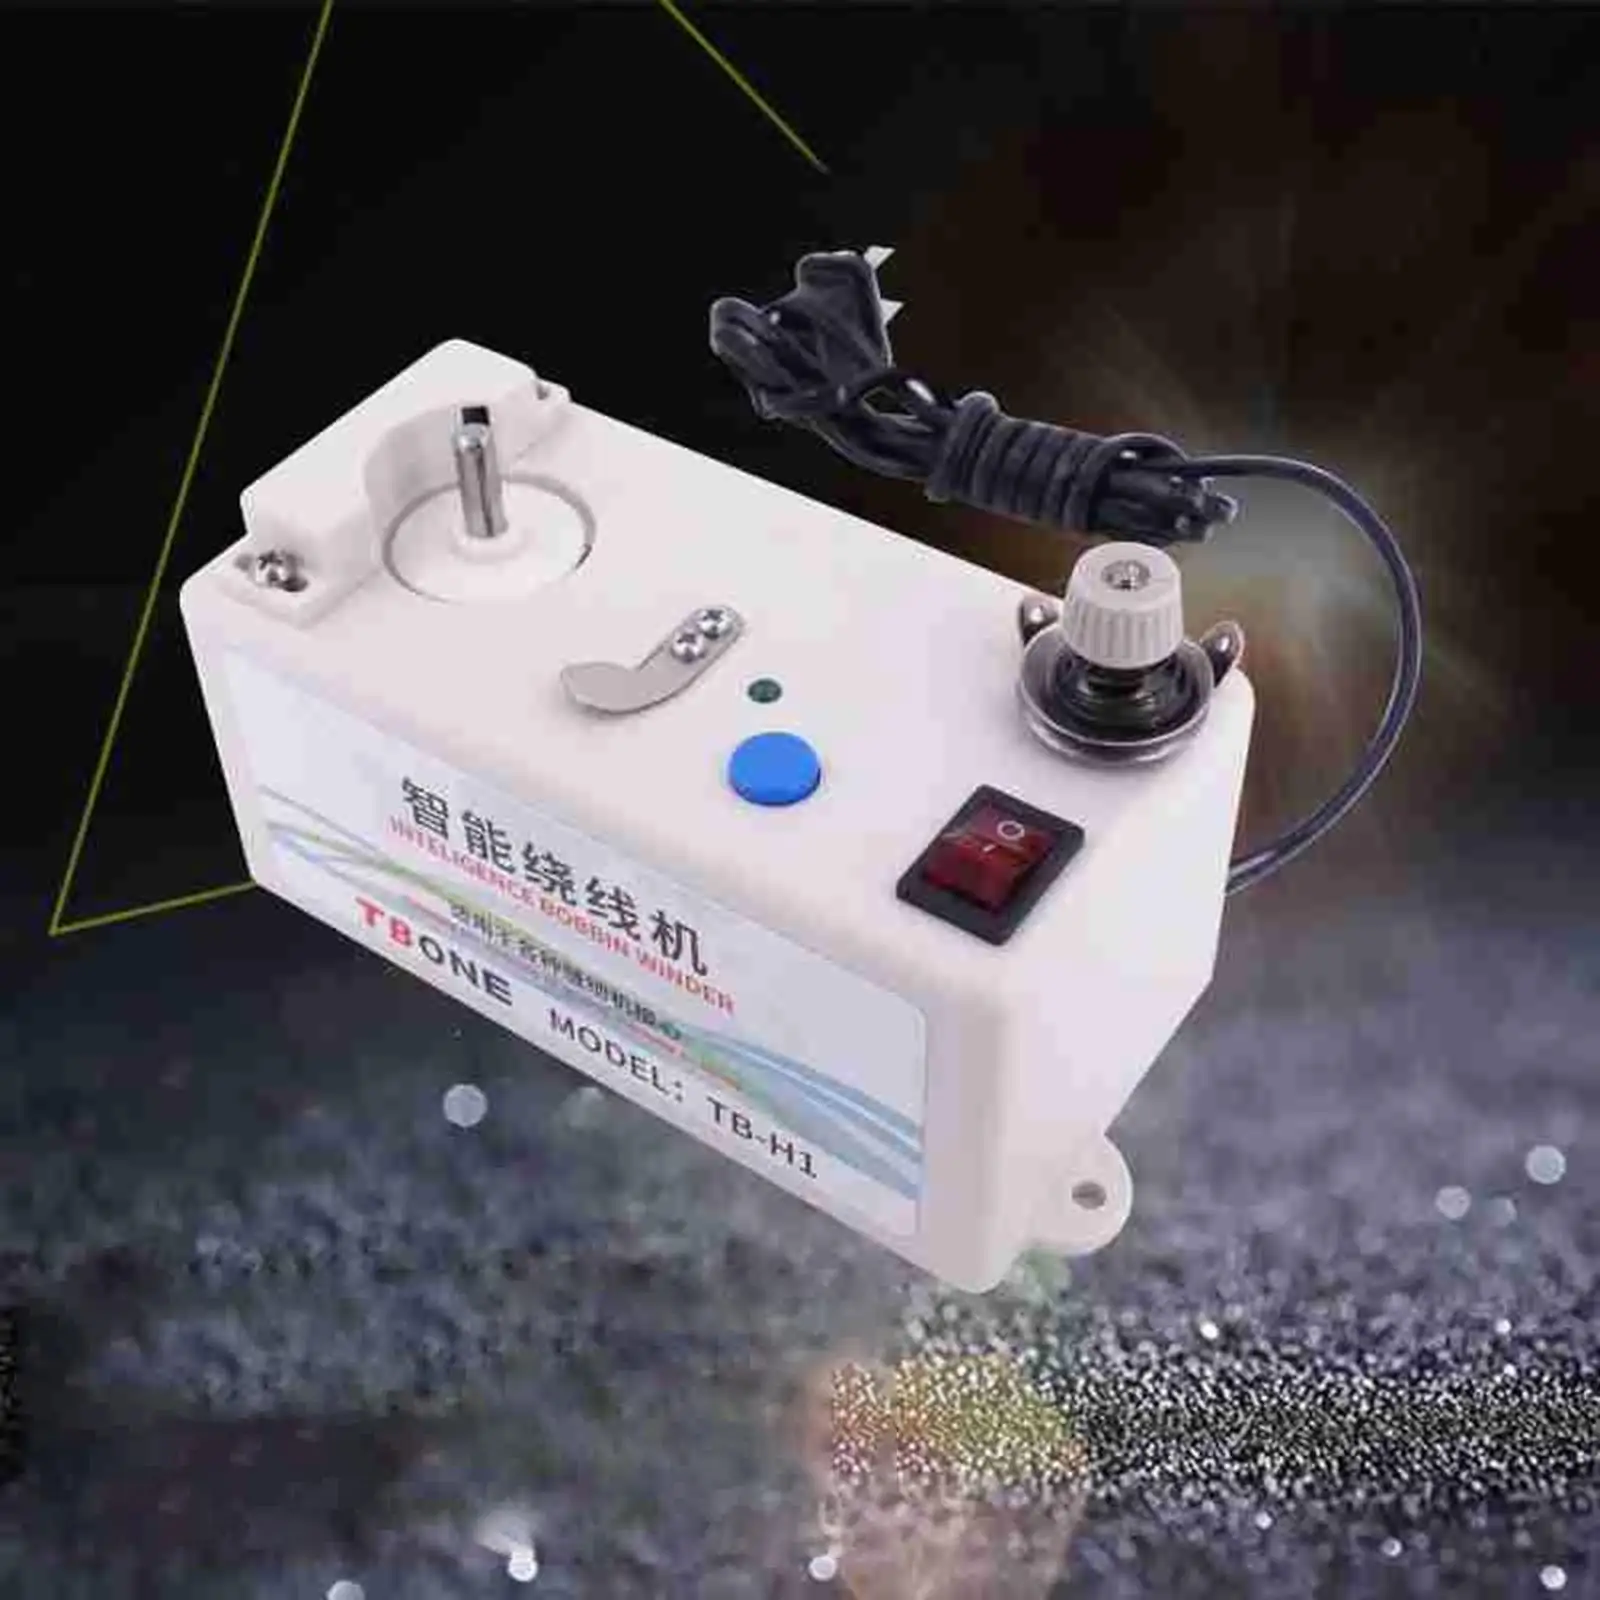 Automatic Bobbin Winder Universal Accessories Sewing Machine Electric Intelligent for Winder DIY Enthusiasts Thread Stand